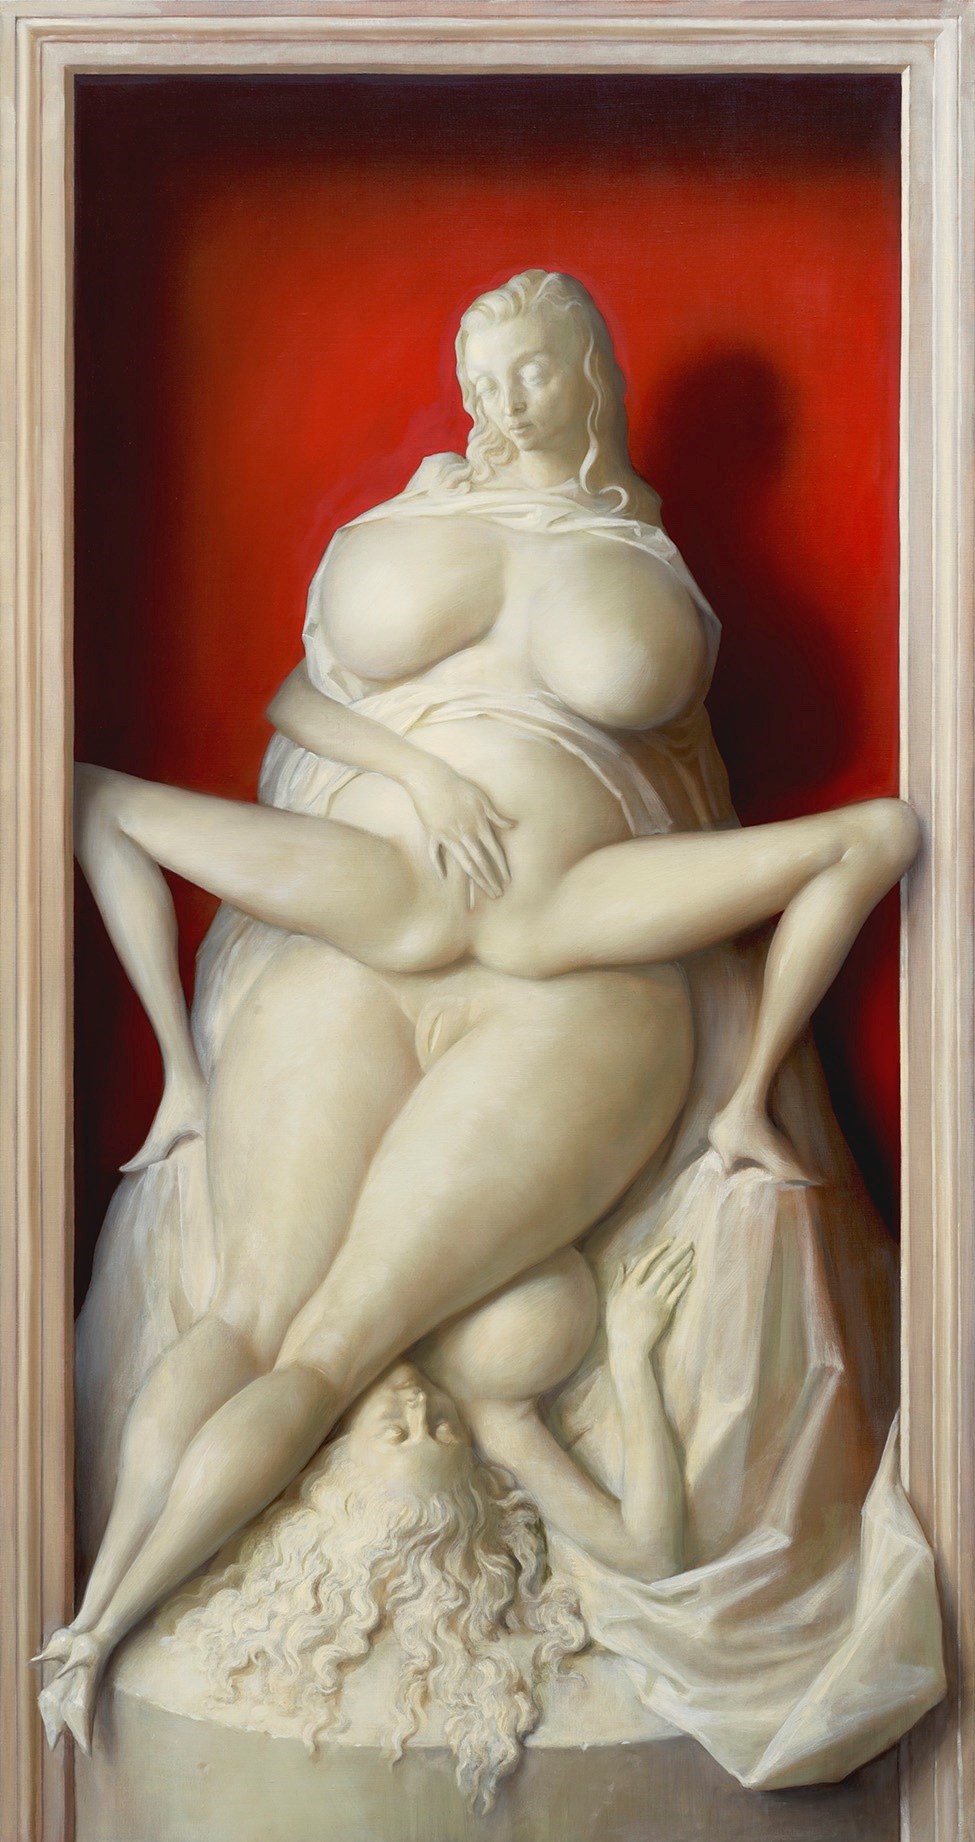 Old Porn Paintings - John Currin captures the desolate mood of porn as classical art | Dazed